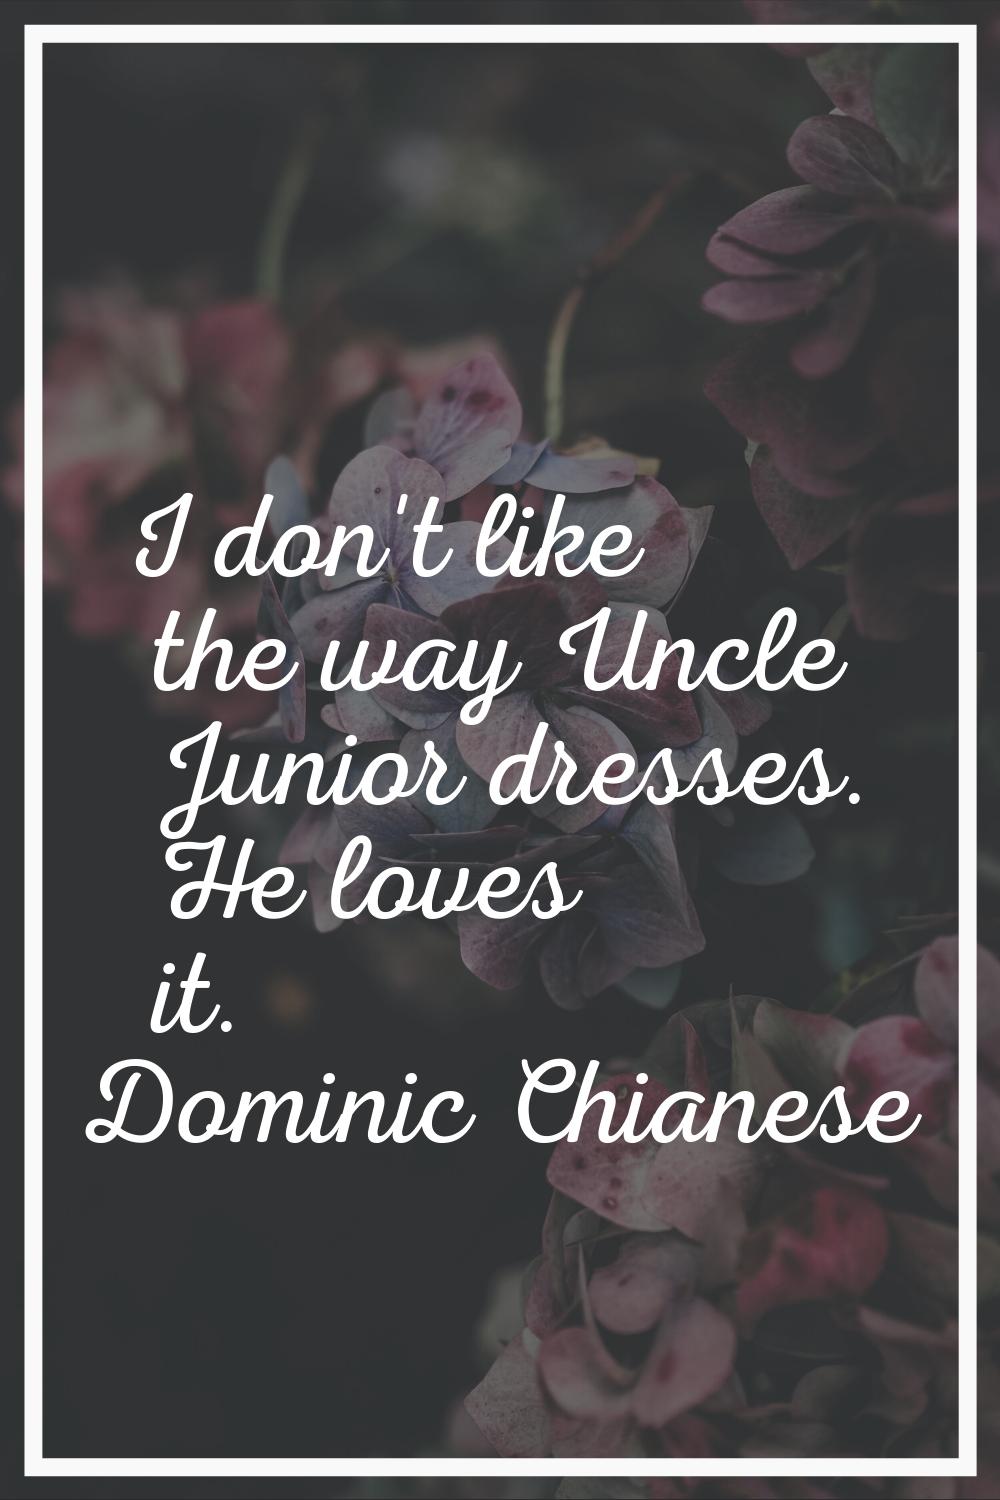 I don't like the way Uncle Junior dresses. He loves it.